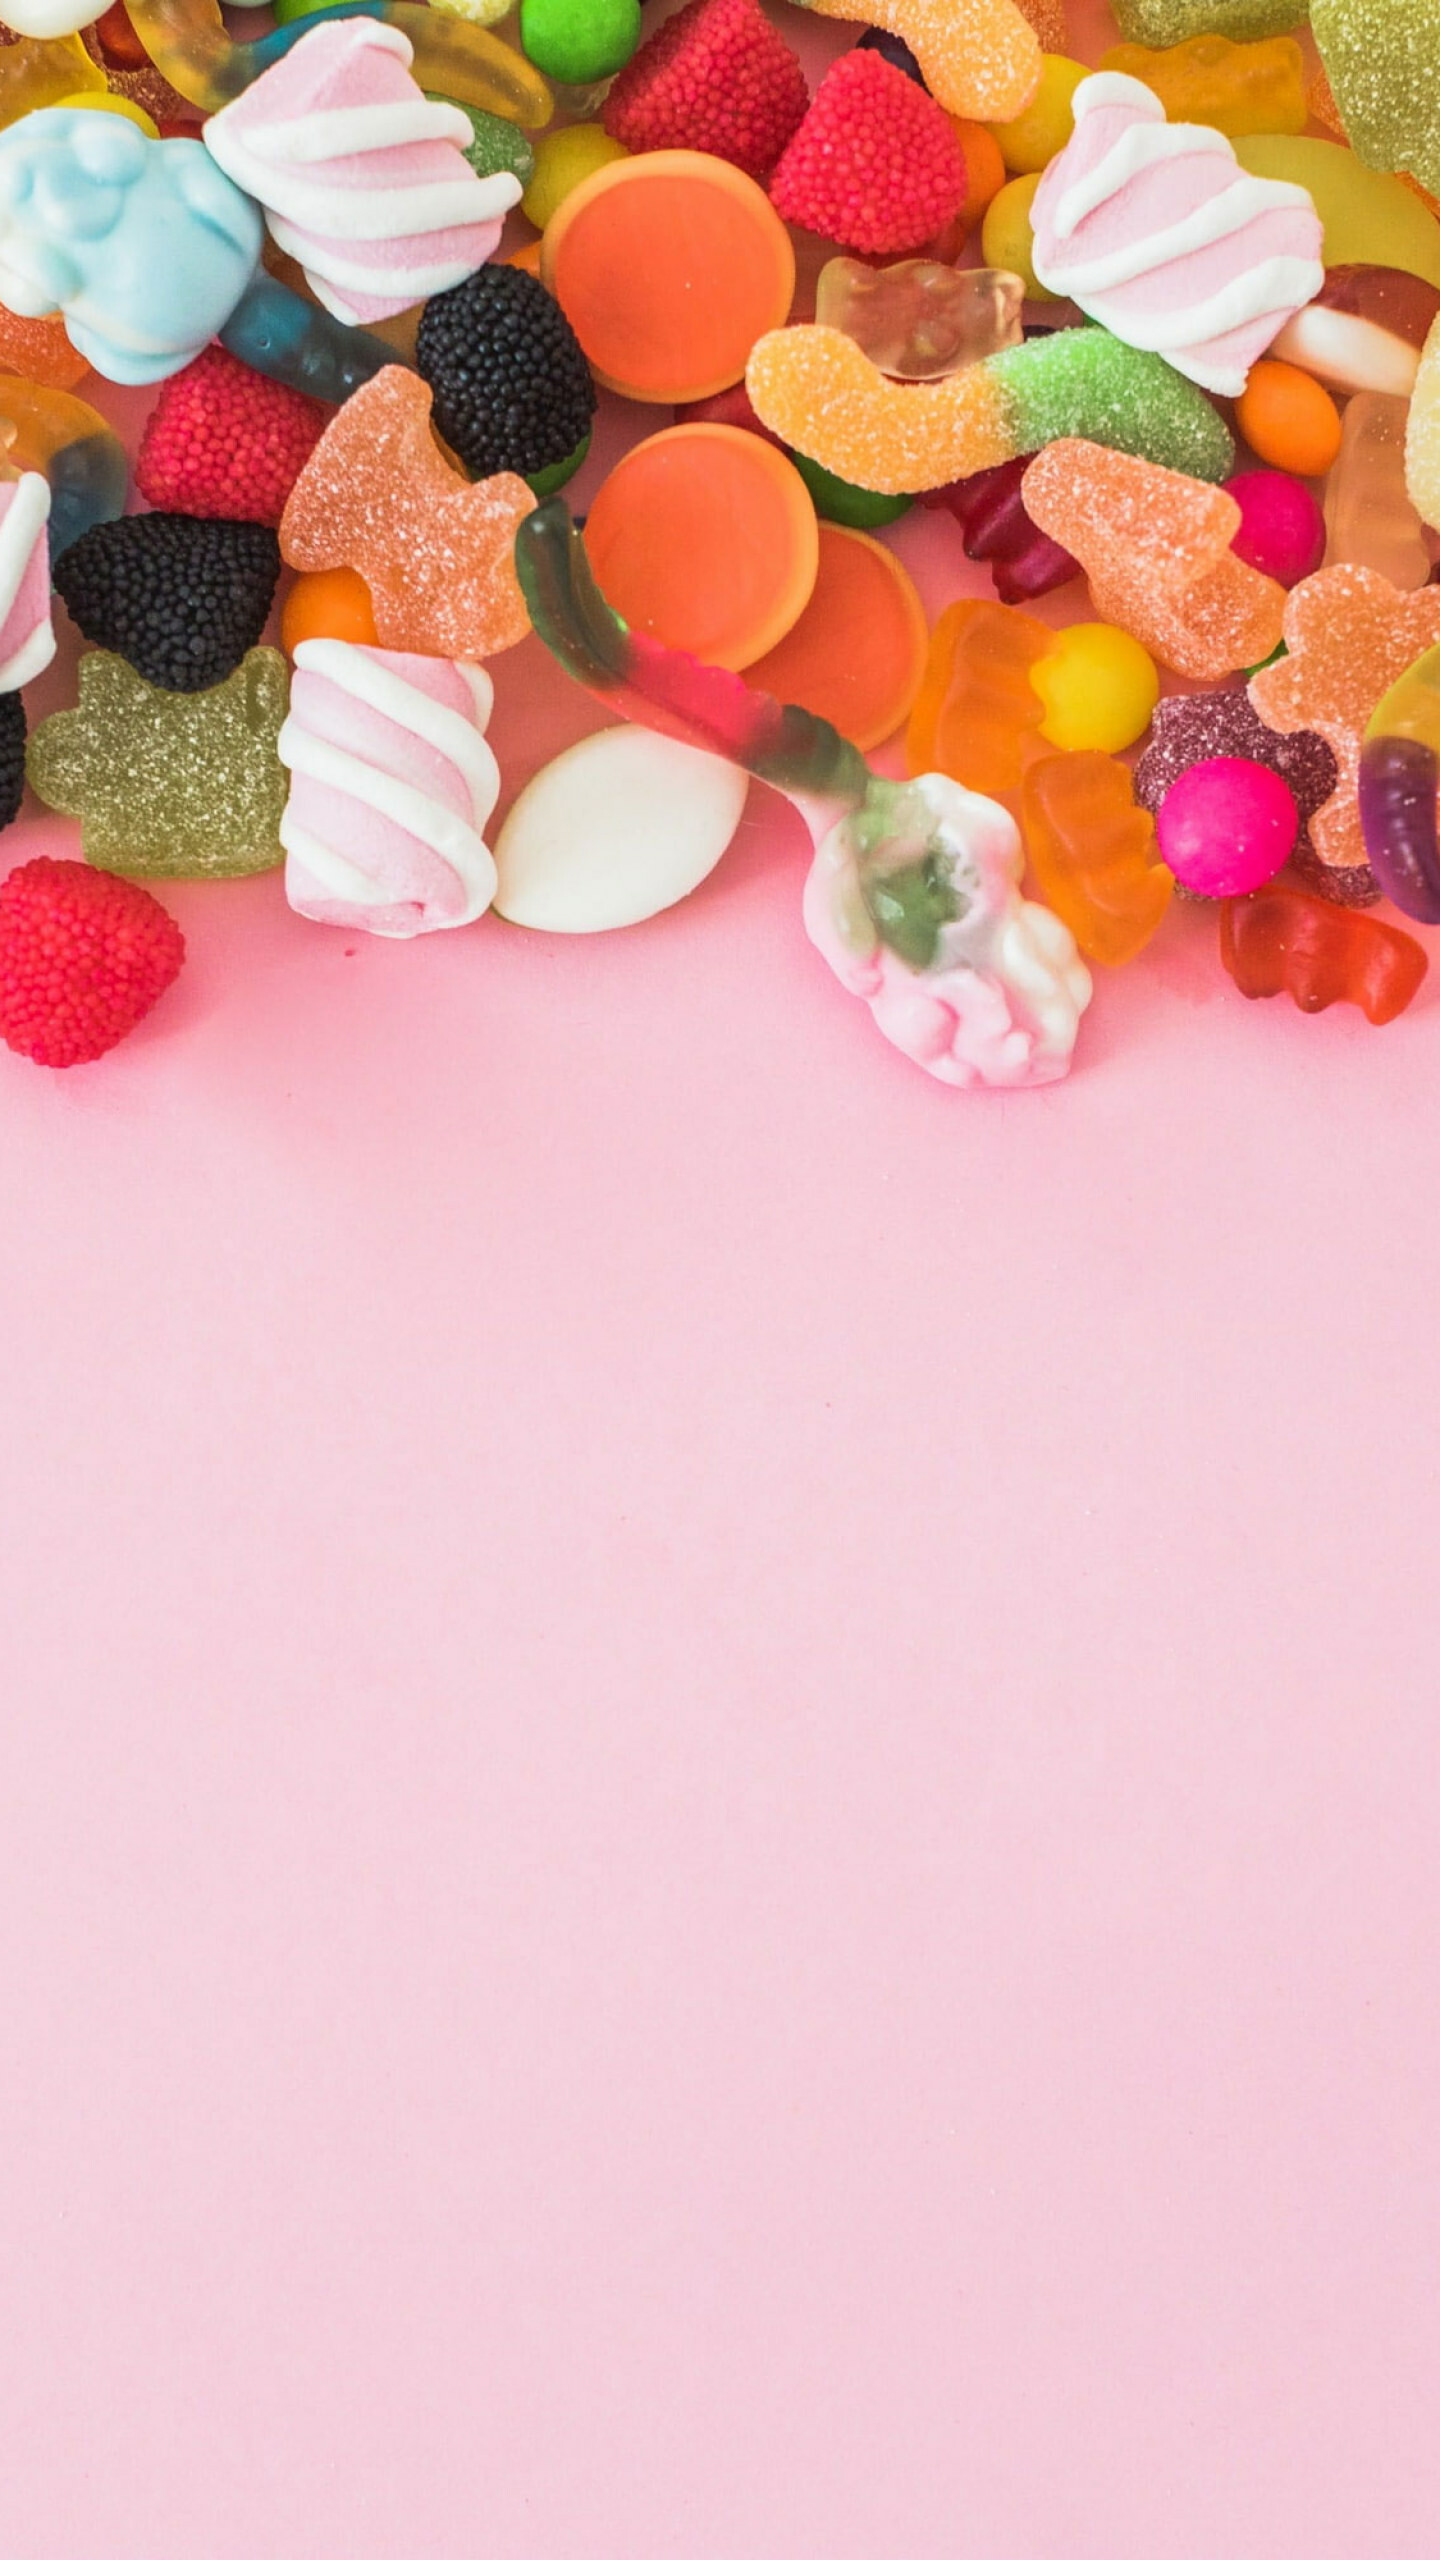 Sweets: Gummies, Brightly colored pectin-based pieces. 1440x2560 HD Wallpaper.